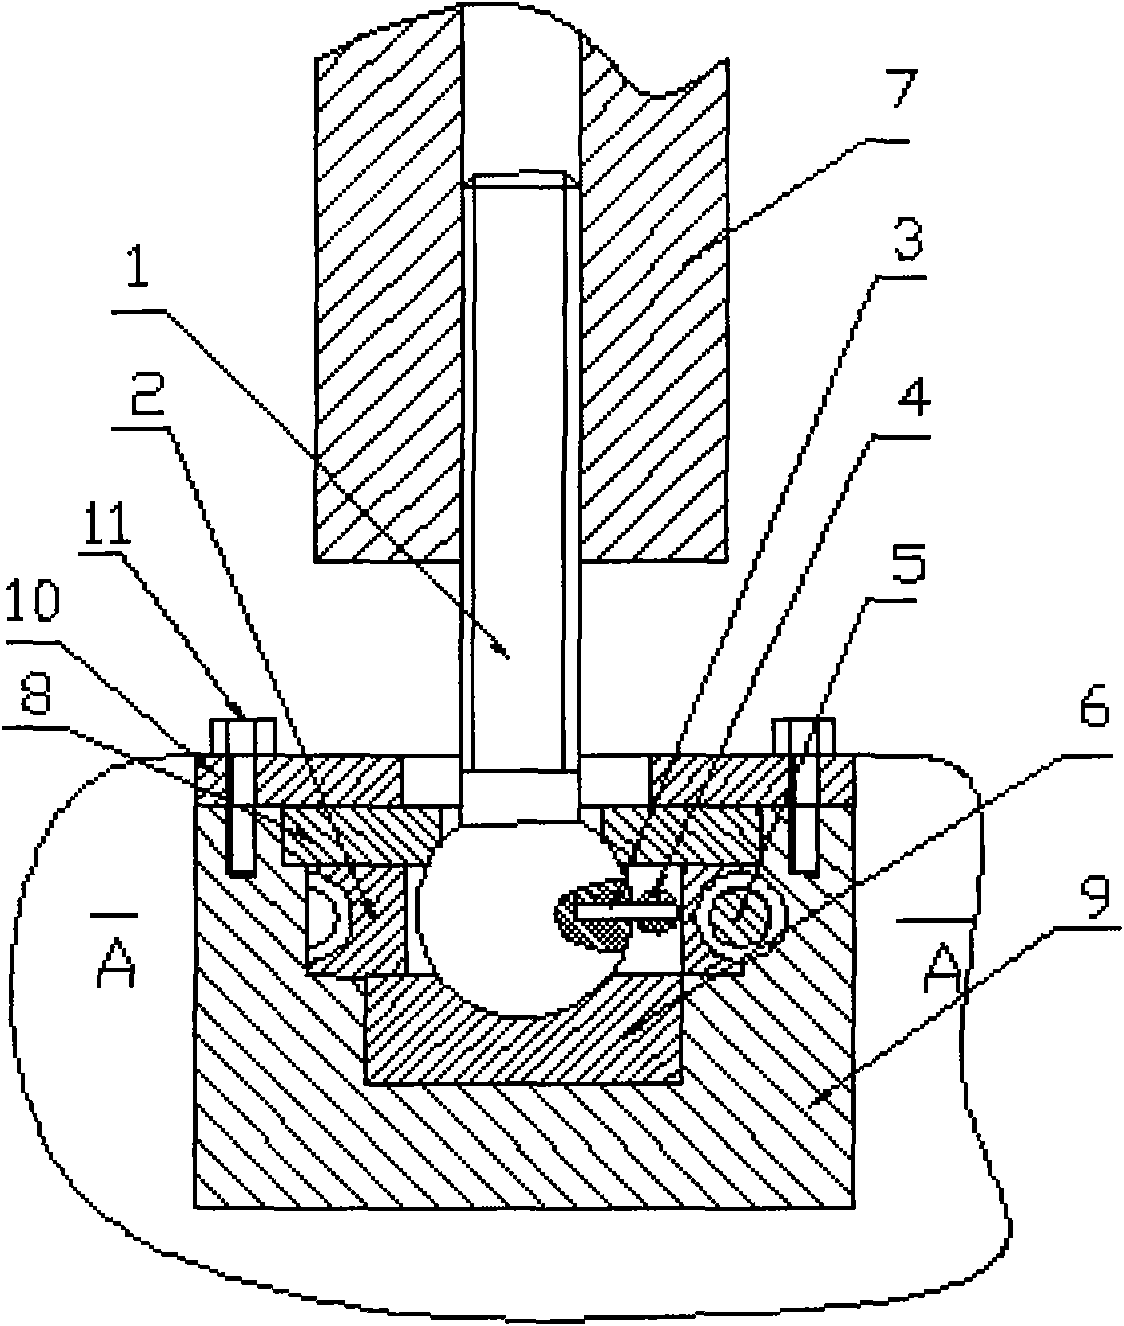 Novel structure for connecting ball screw and worm gear